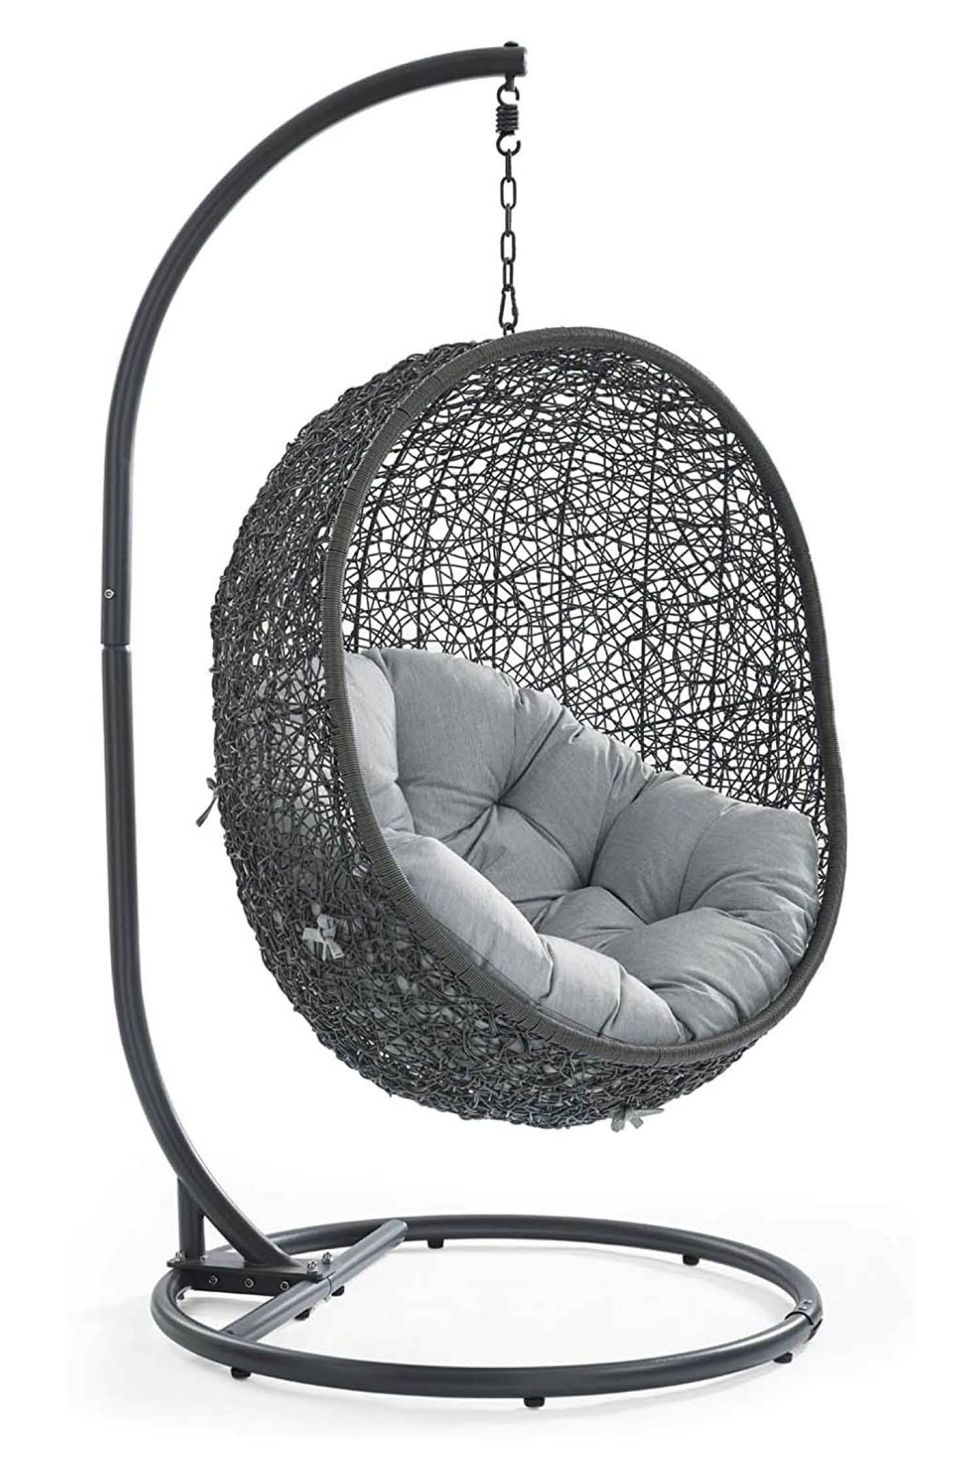 Swing Egg Chair with Leg Rest